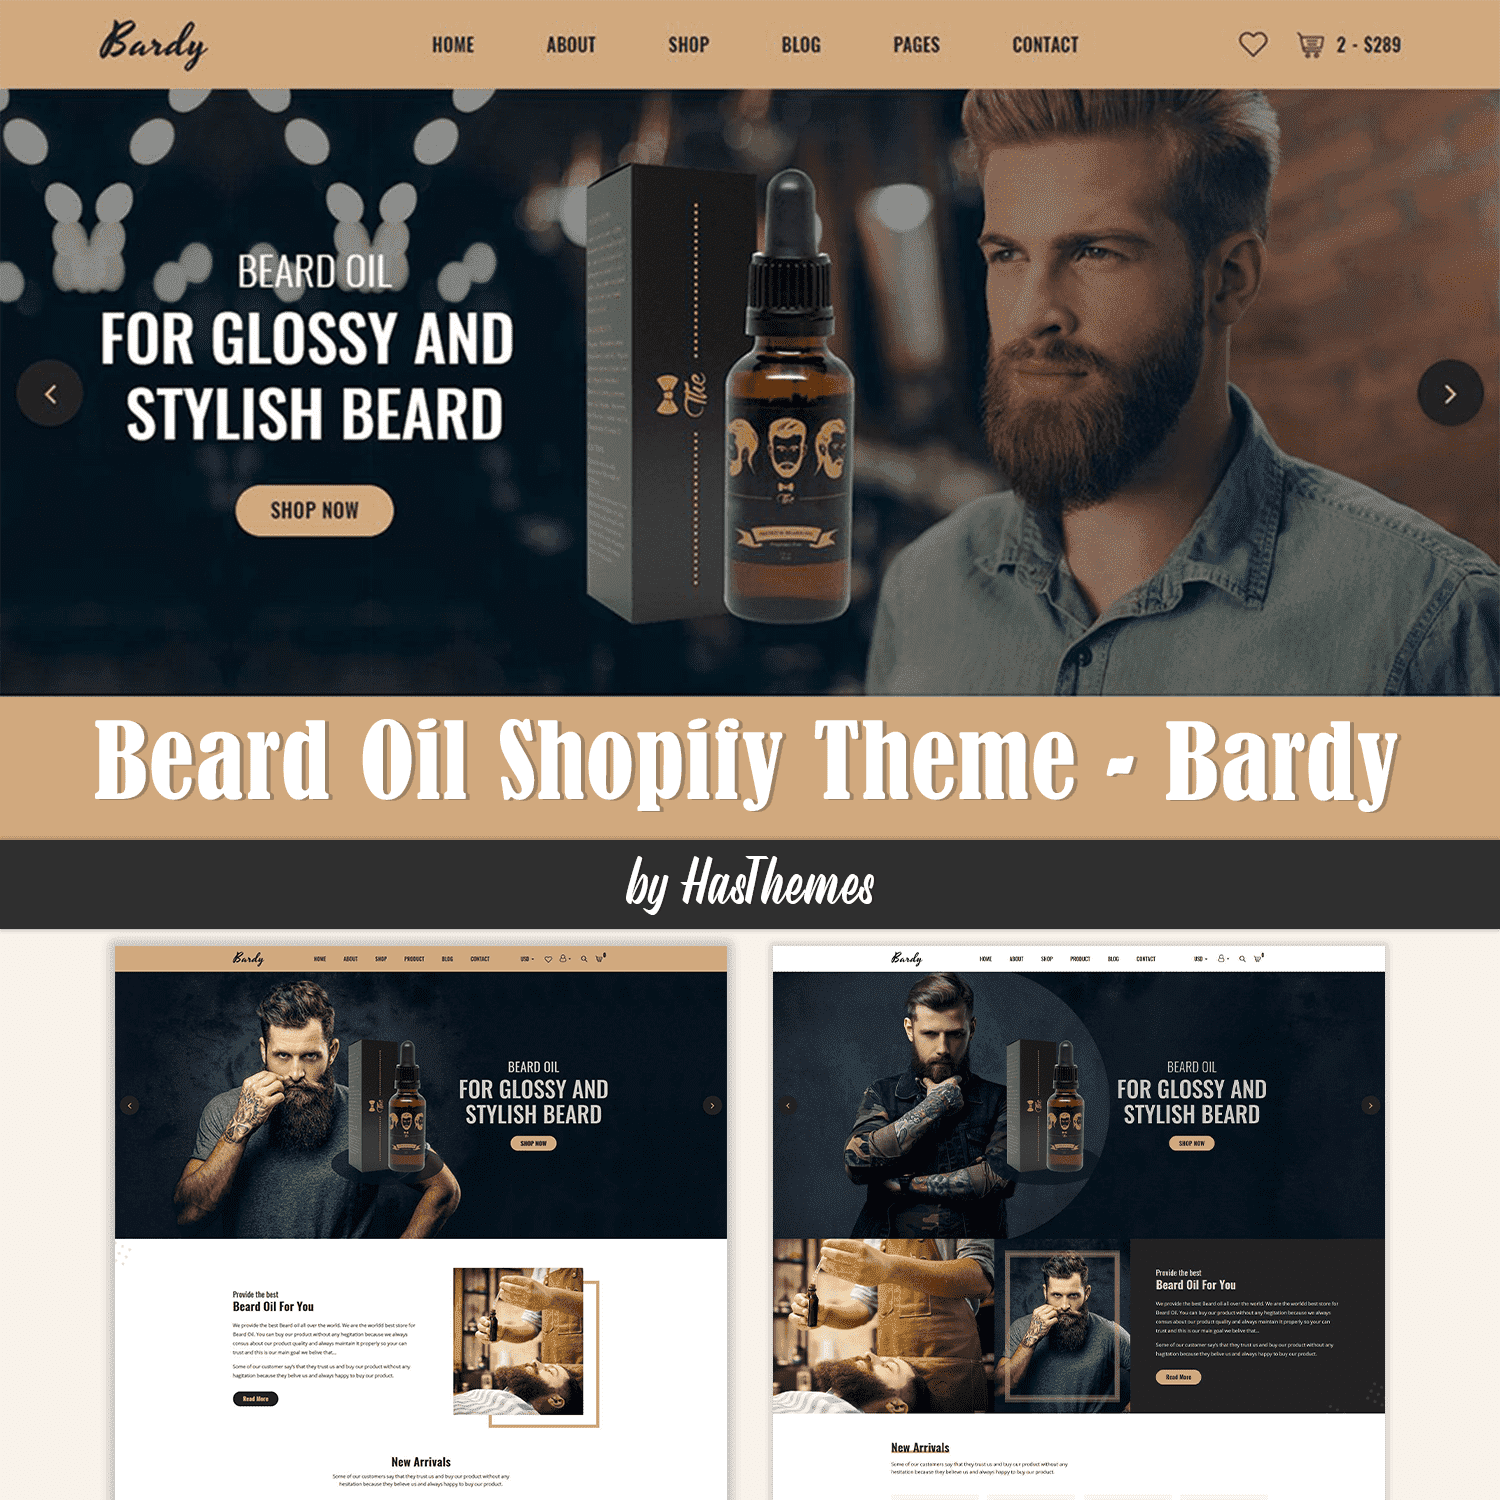 New arrivals of Beard oil shopify theme.